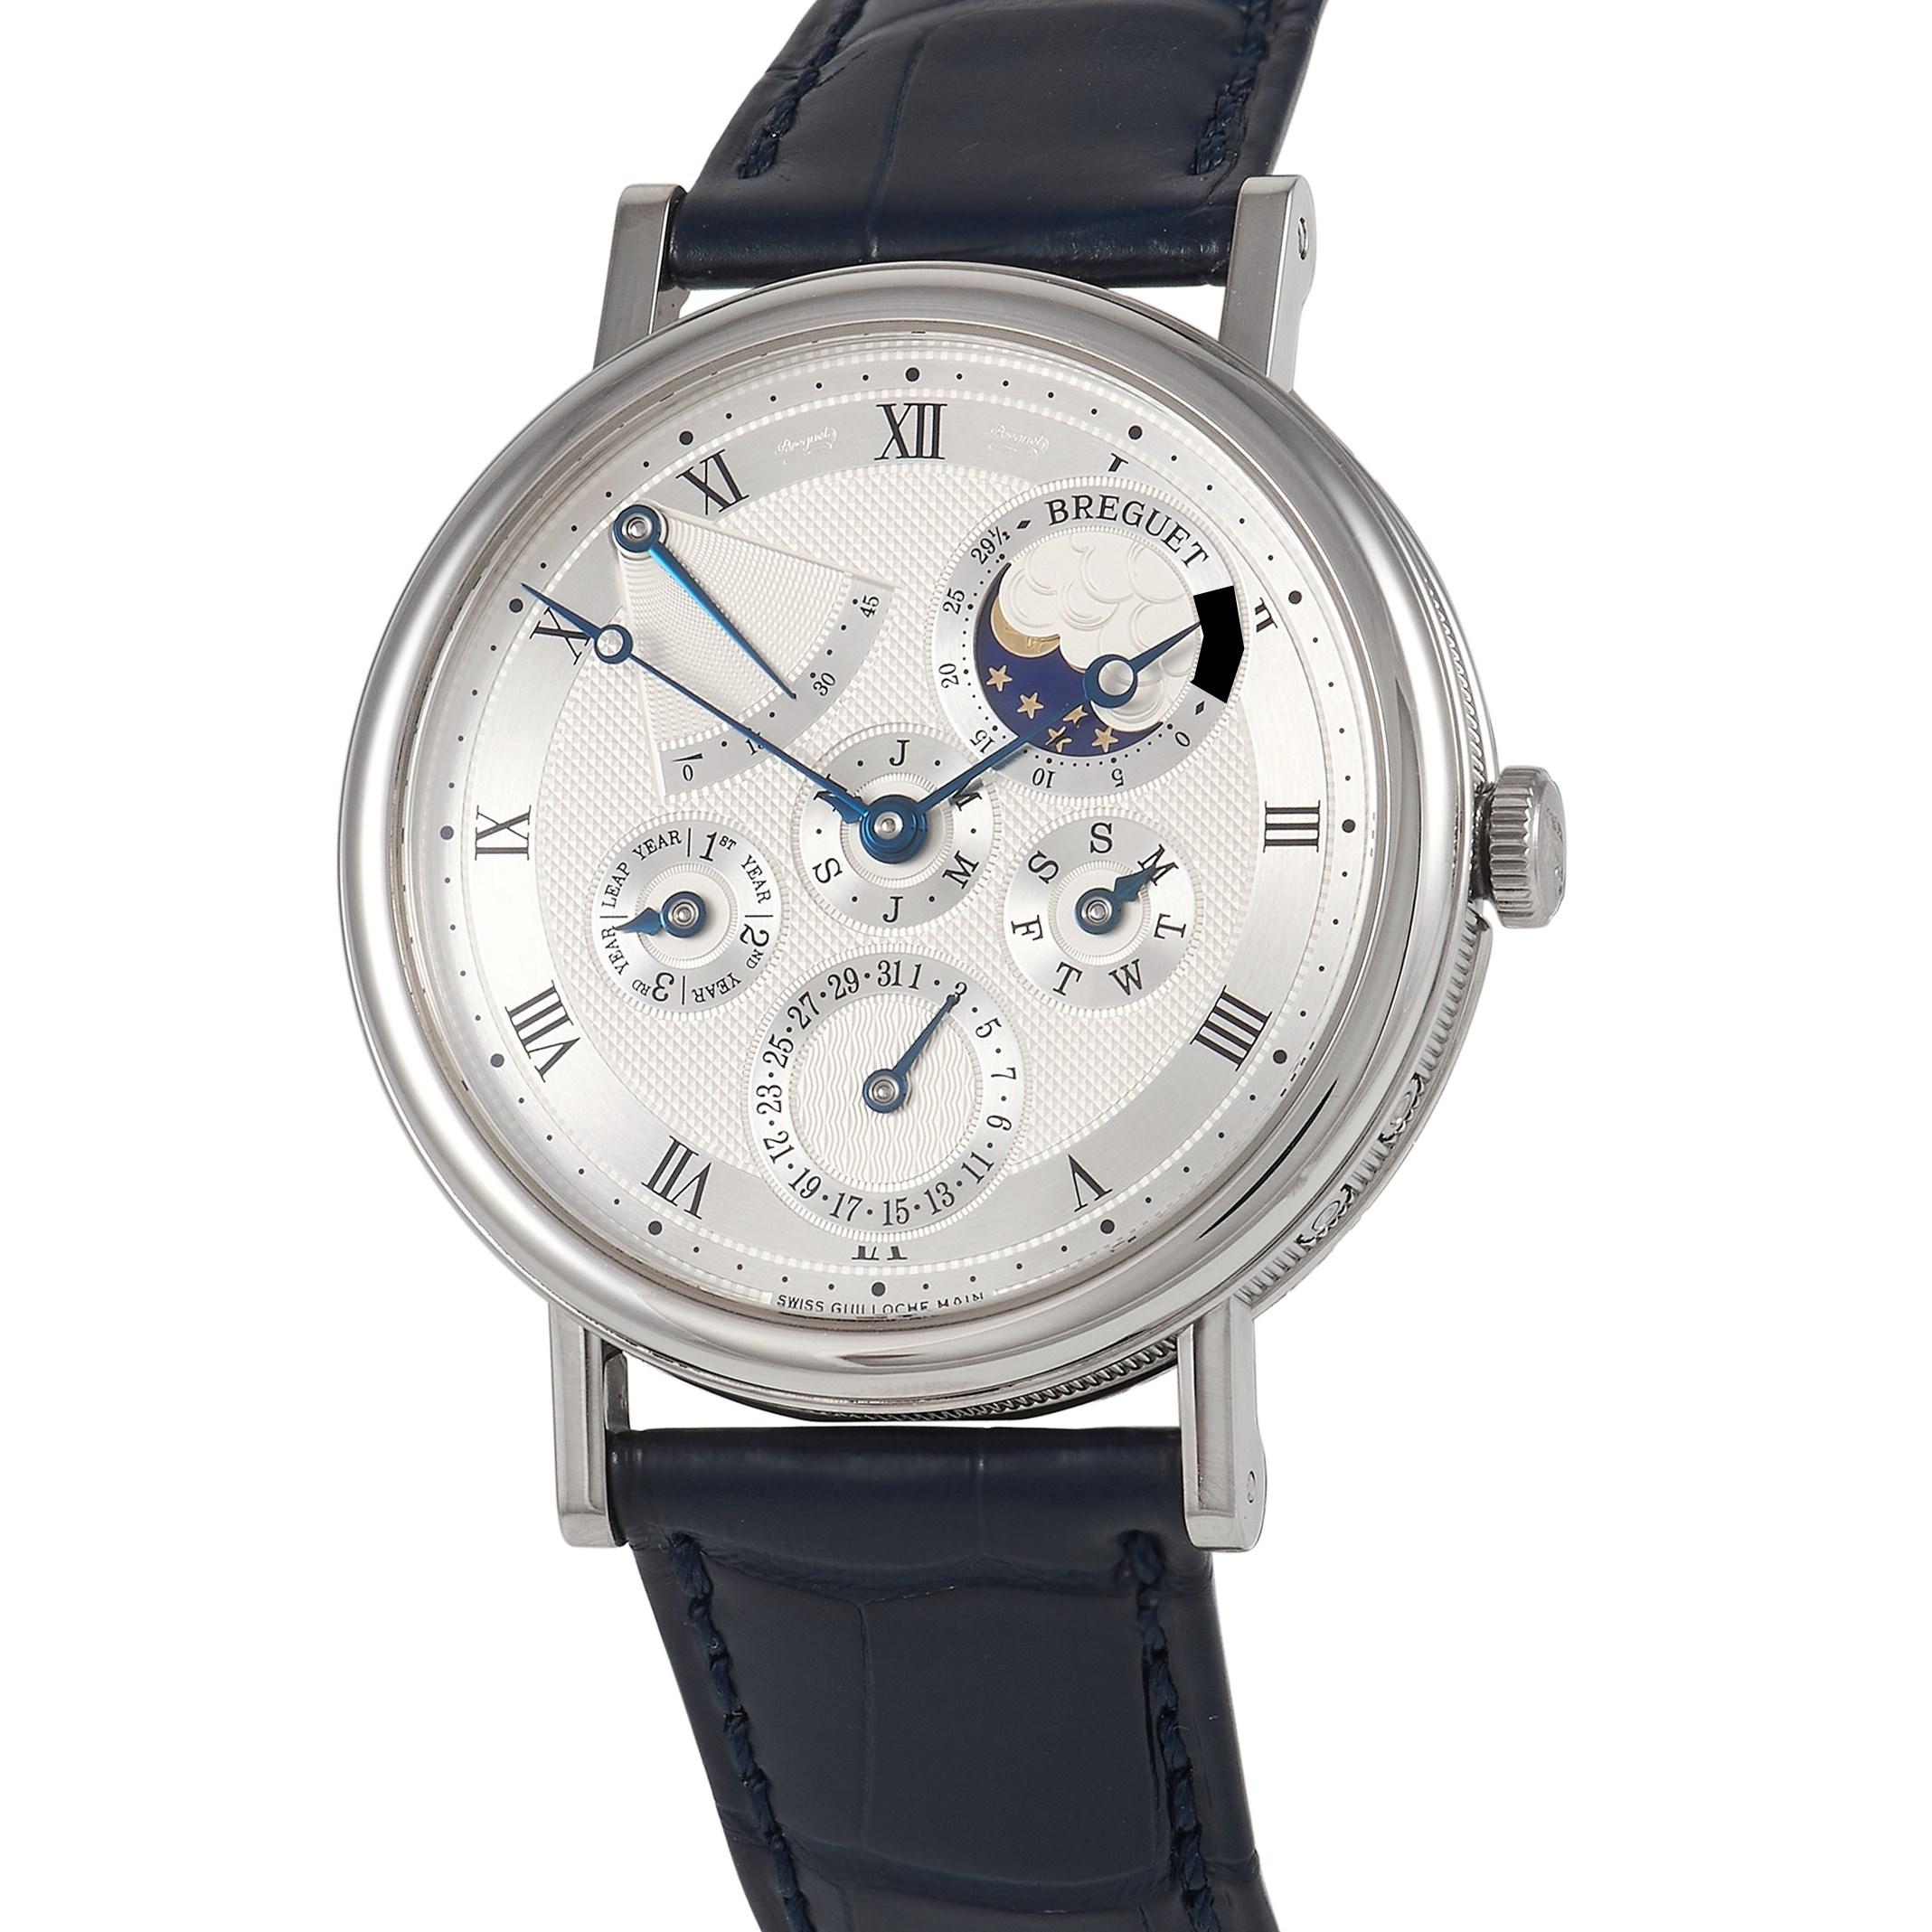 It's easy to see why this Breguet Classique is gaining in popularity among watch collectors. The Breguet Classique Perpetual Calendar Watch 5327BB/IE/9V6 features an extremely beautiful guilloche engraved silver dial with blued hands and Roman